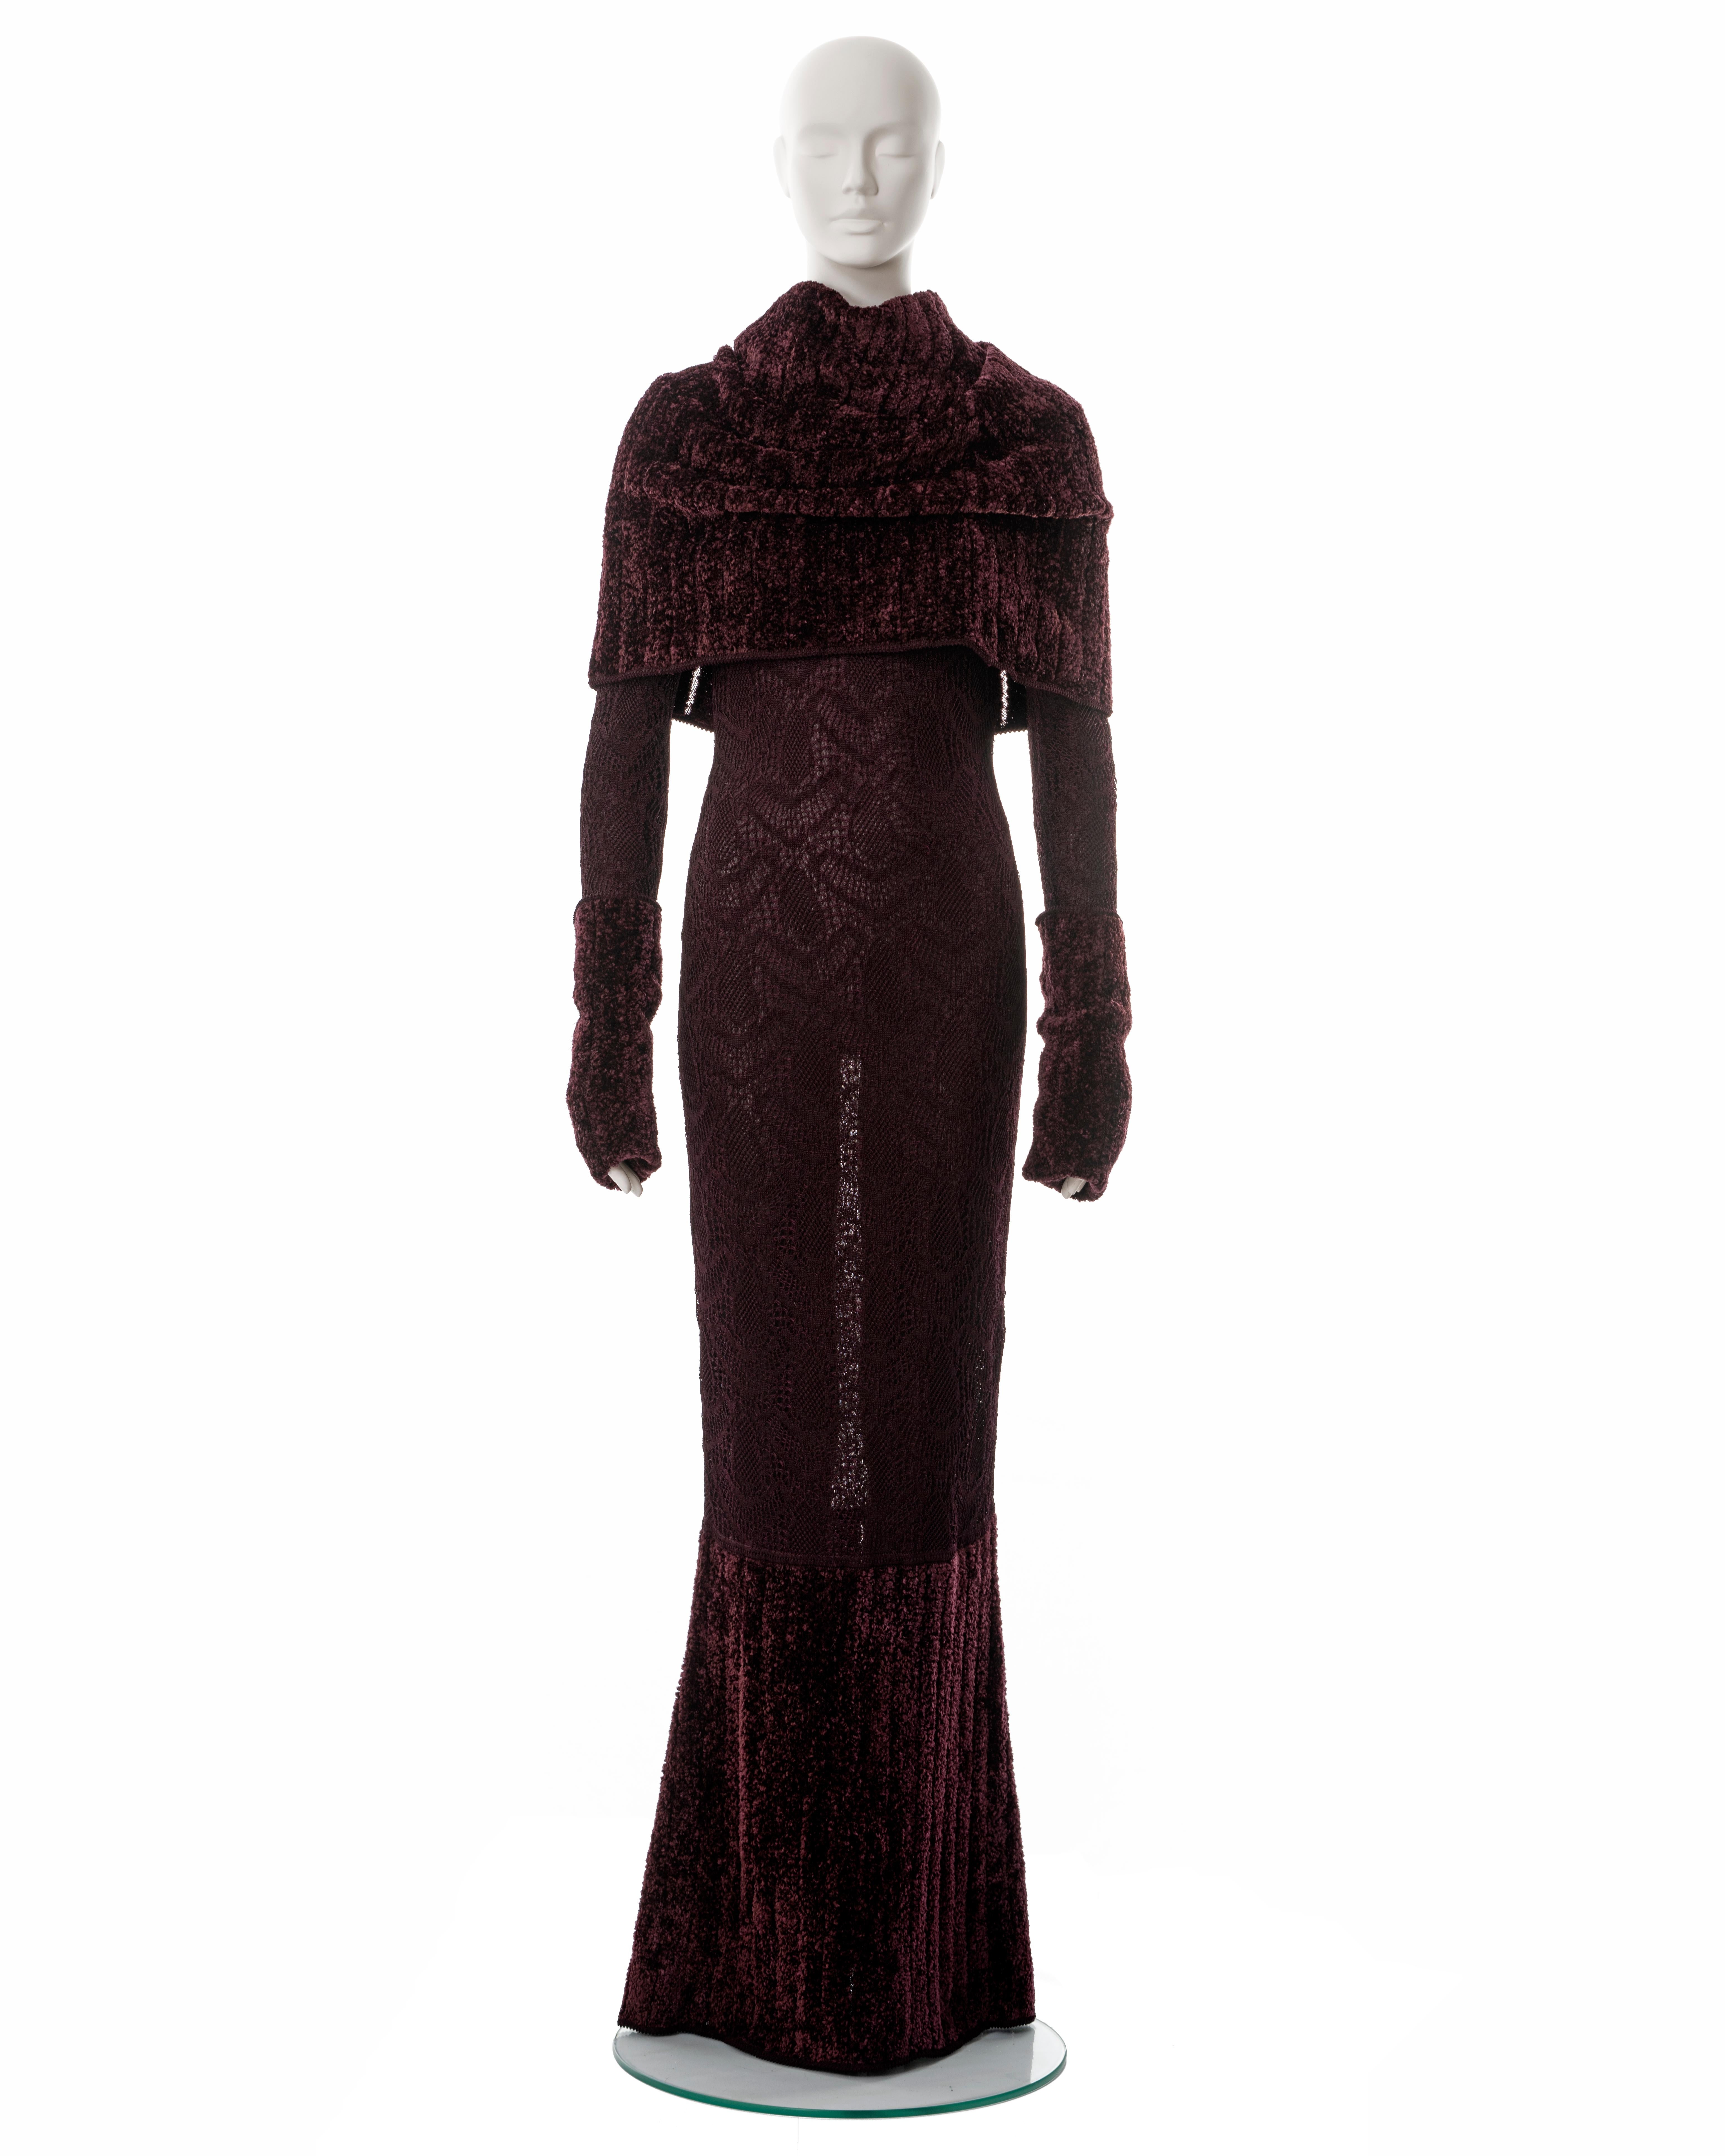 Women's John Galliano burgundy knitted lace and chenille evening dress, fw 1999